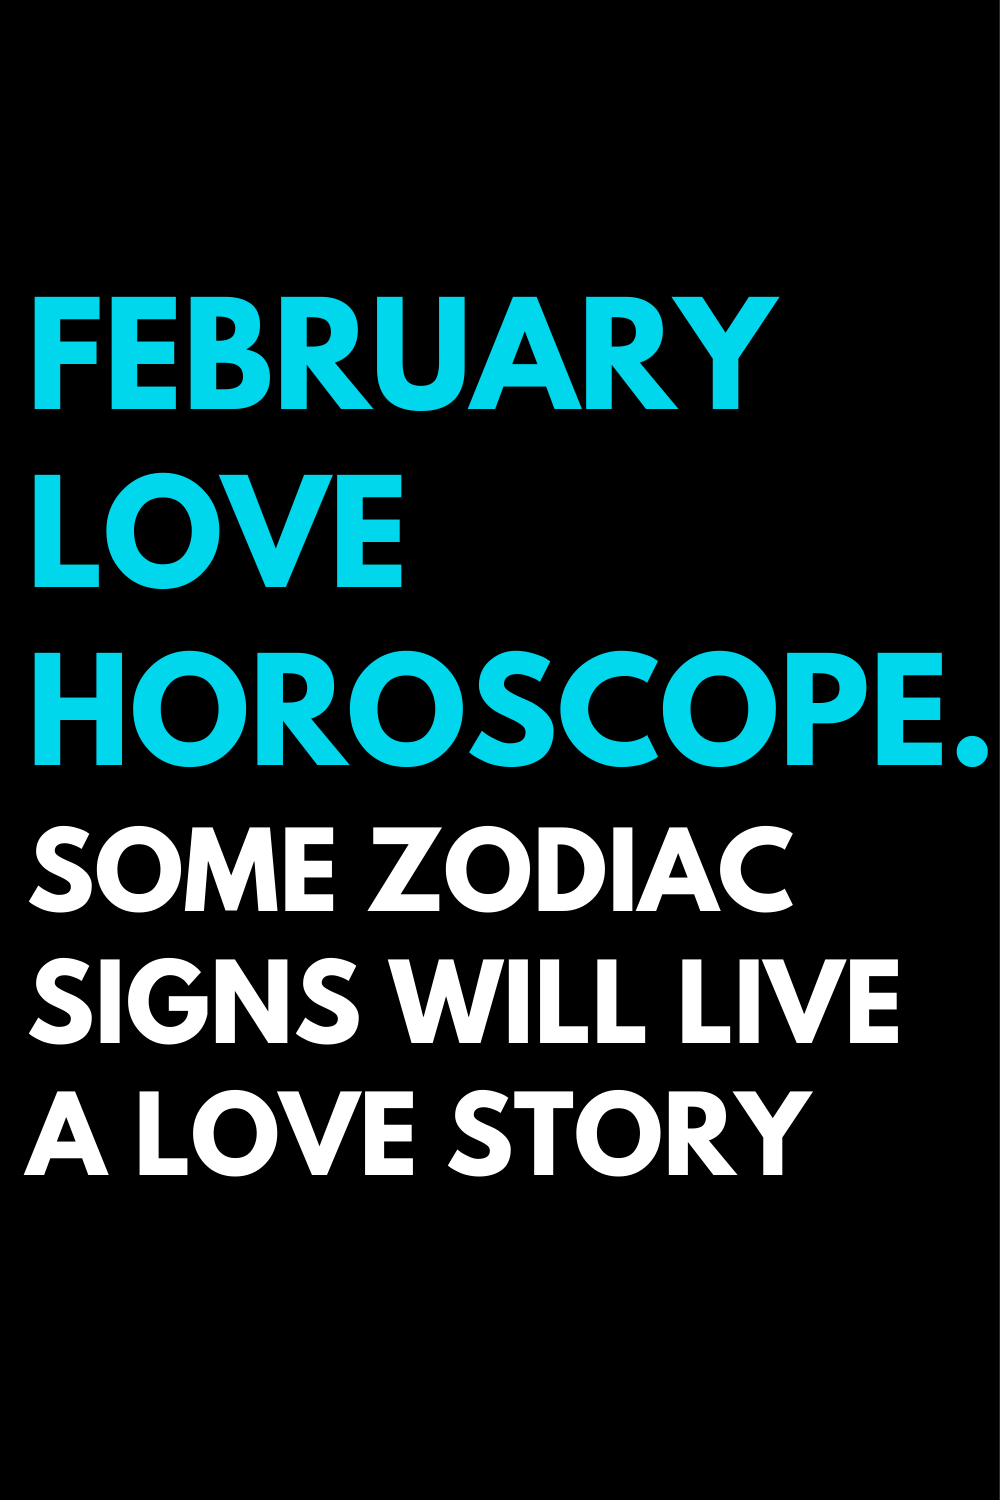 February love horoscope. Some zodiac signs will live a love story